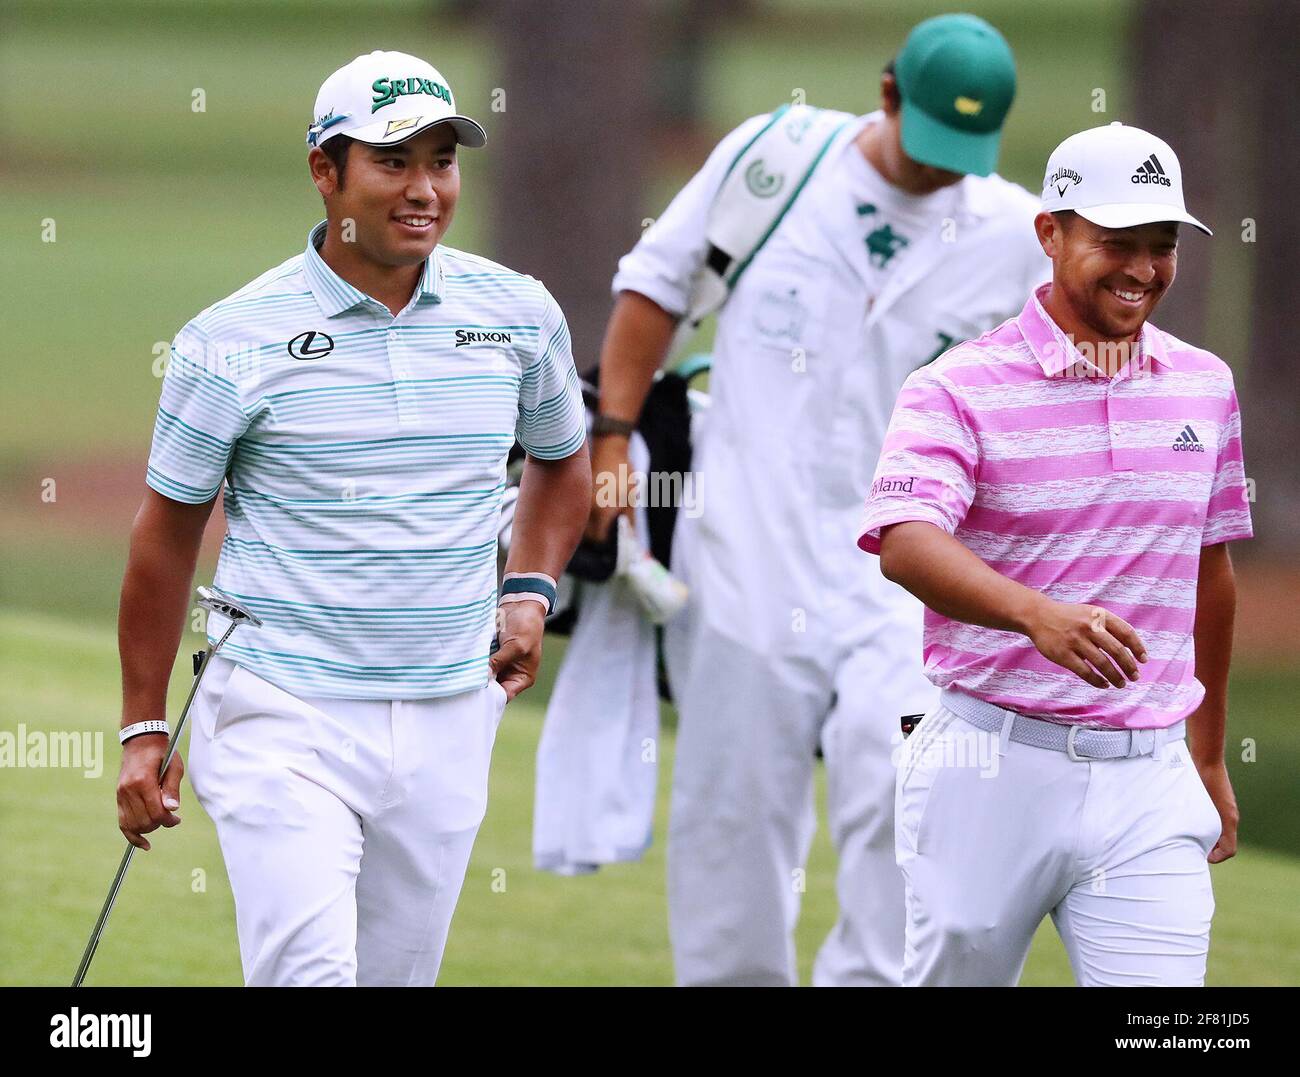 Augusta, USA. 11th Apr, 2021. Hideki Matsuyama, left, and Xander Schauffele are all smiles after they both made eagle putts on the 15th green during the third round of the Masters on Saturday, April 10, 2021, in Augusta, Georgia. (Photo by Curtis Compton/Atlanta Journal-Constitution/TNS/Sipa USA) Credit: Sipa USA/Alamy Live News Stock Photo